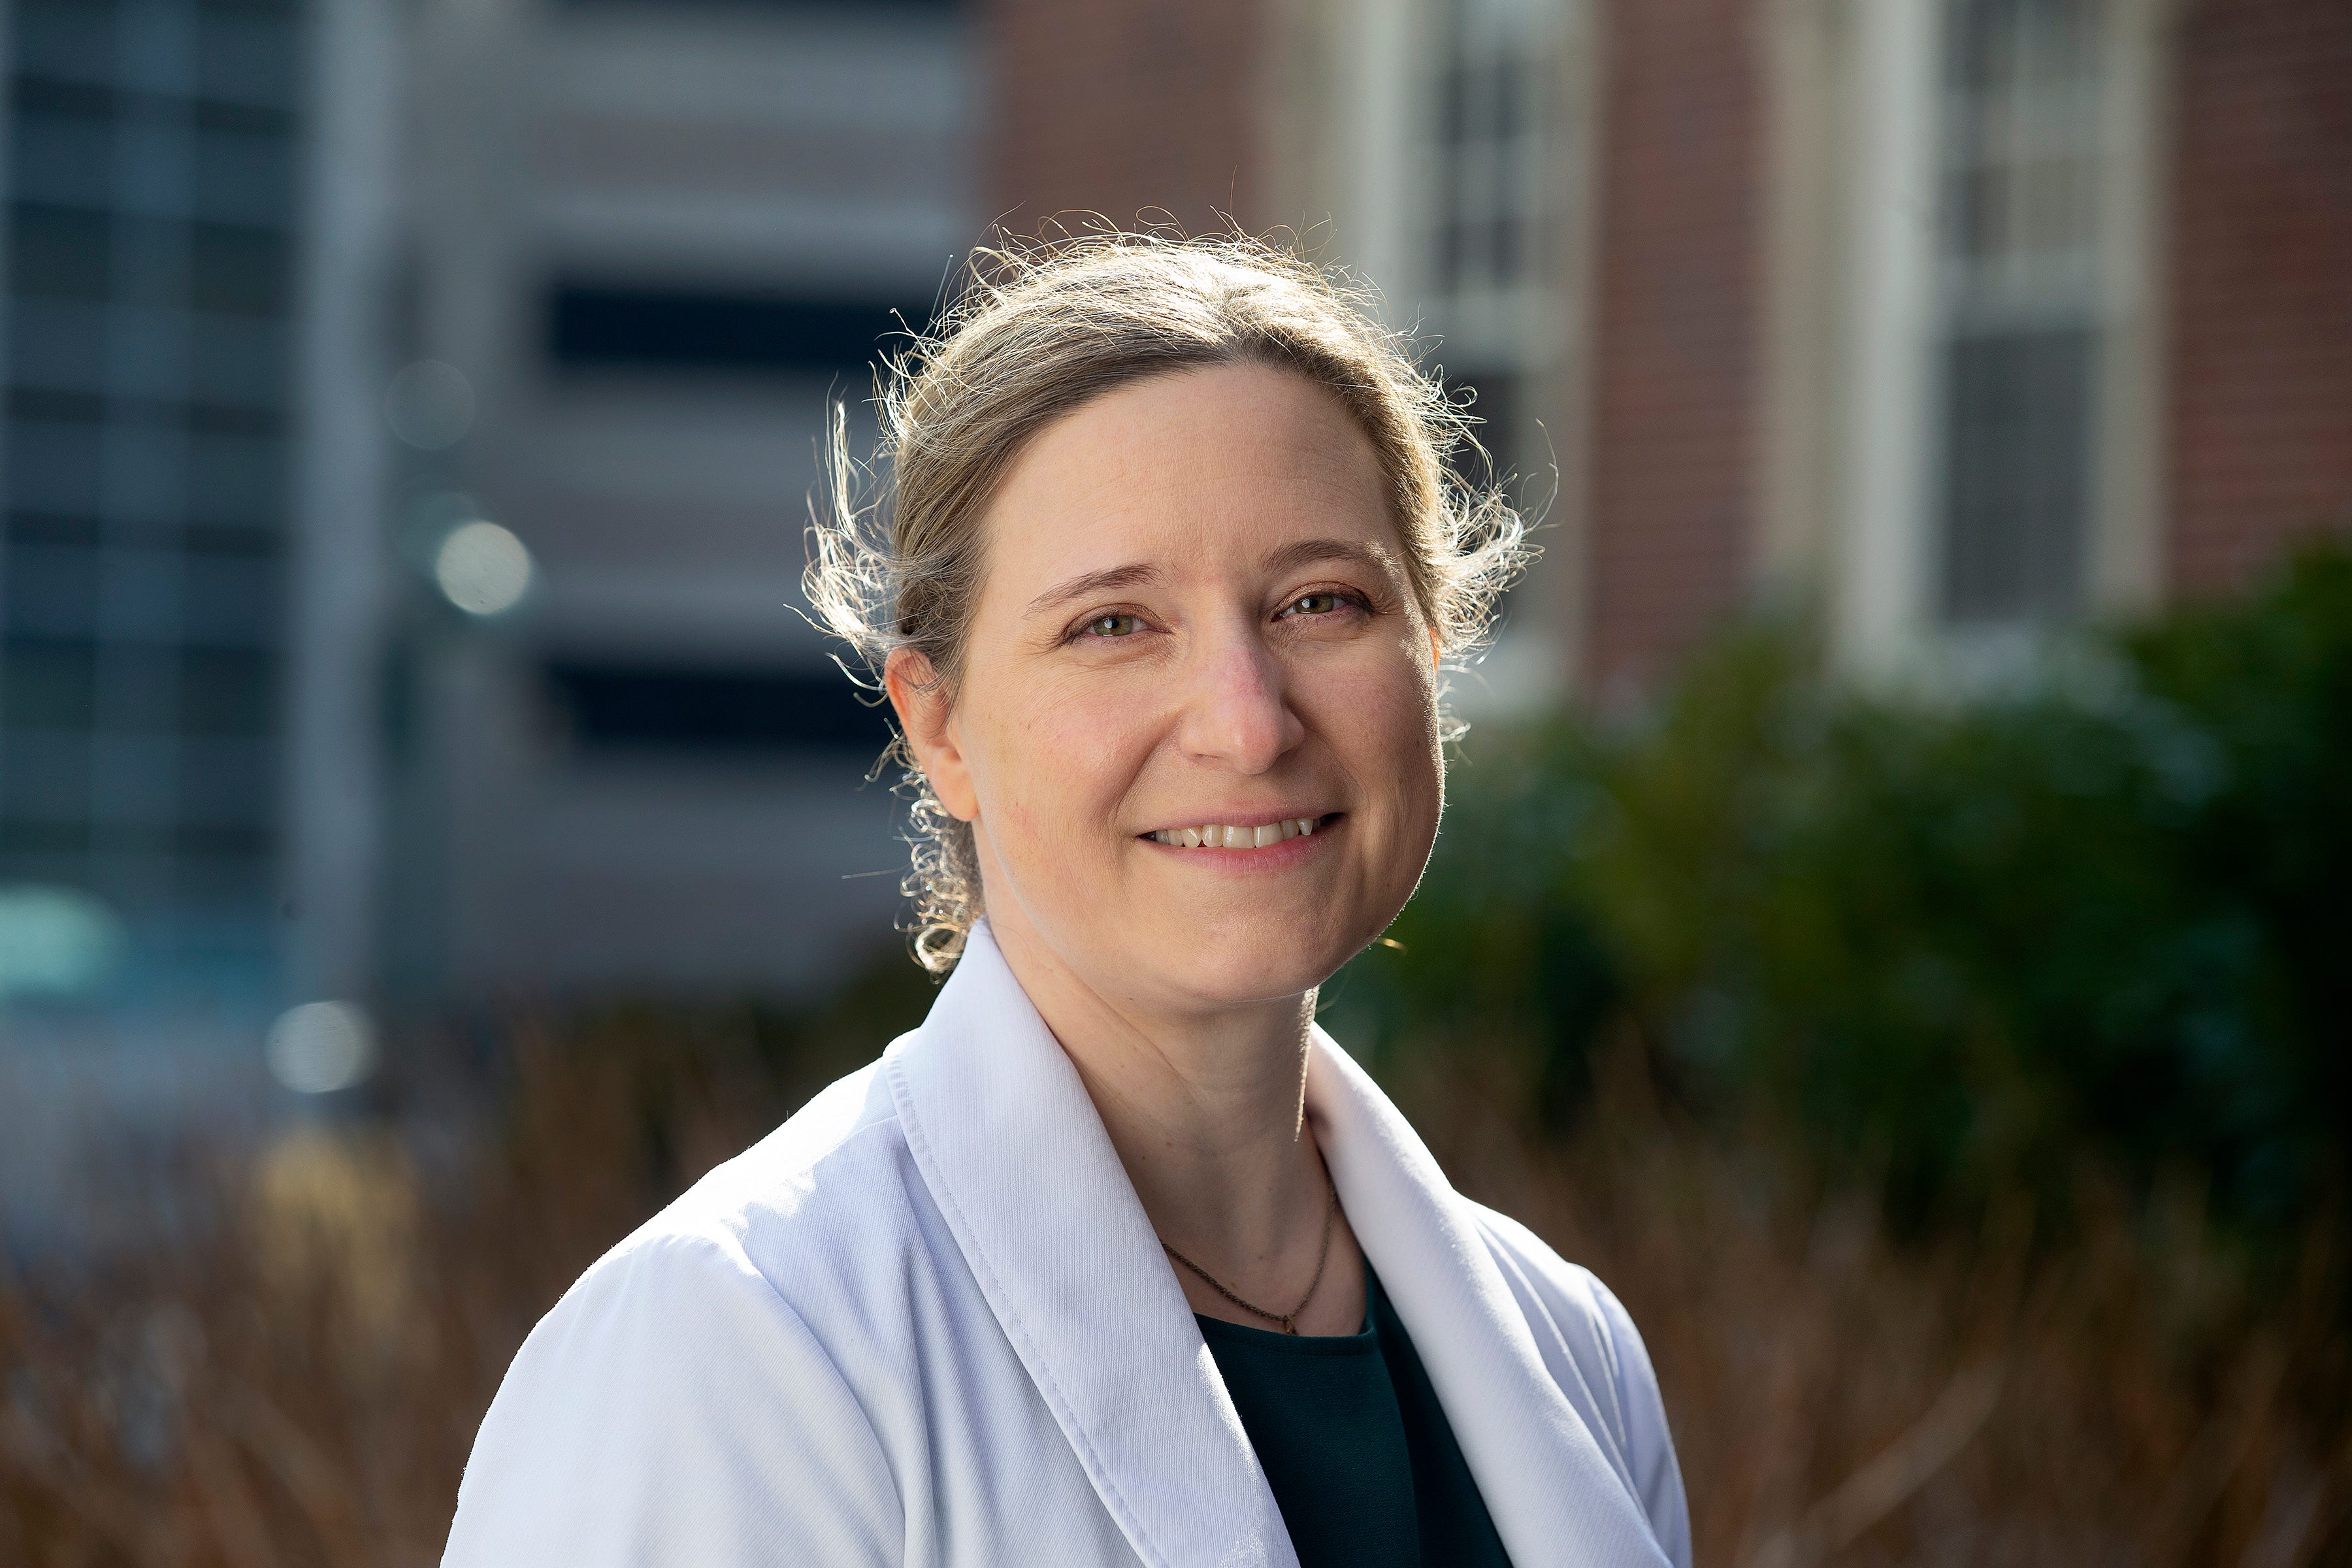 Dr. Violet Kramer, co-director of ICU, talks about working through the COVID-19 pandemic and the impact it has had on her life at Monmouth Medical Center in Long Branch, NJ Tuesday, February 8, 2022.